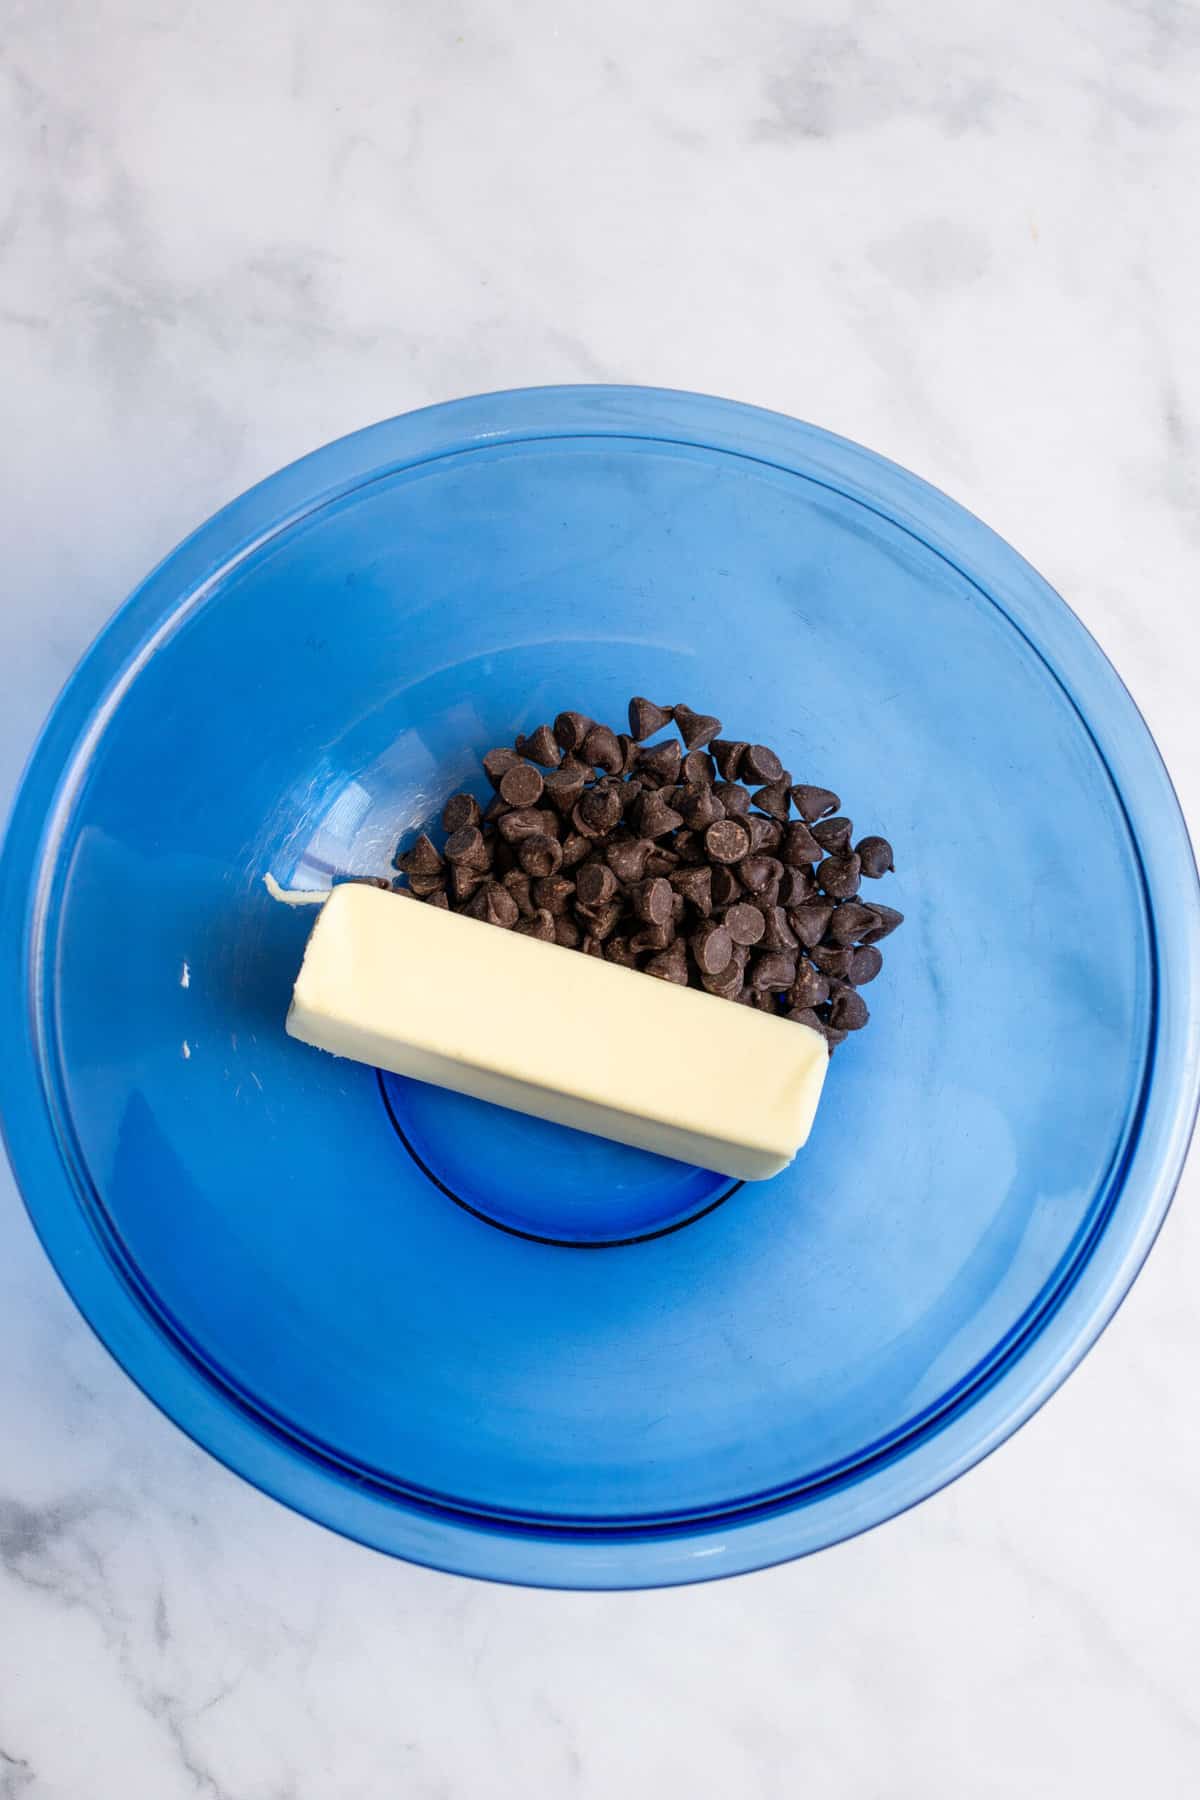 combine butter and chocolate chips in microwaveable bowl